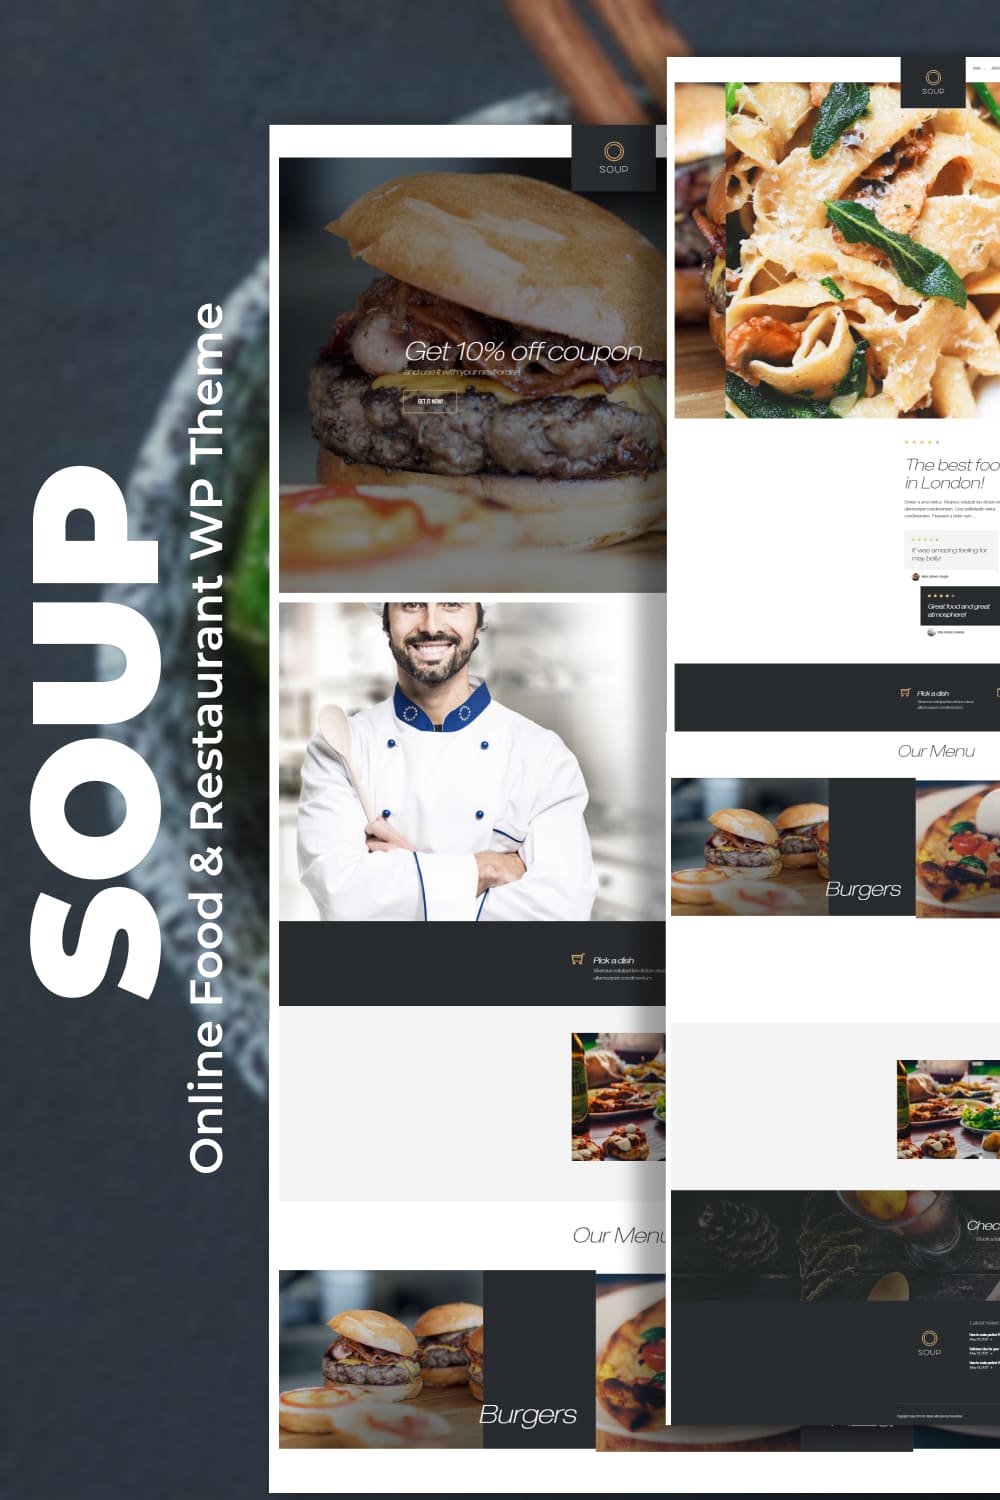 The best food of the Soup - Online Food & Restaurant WP Theme.